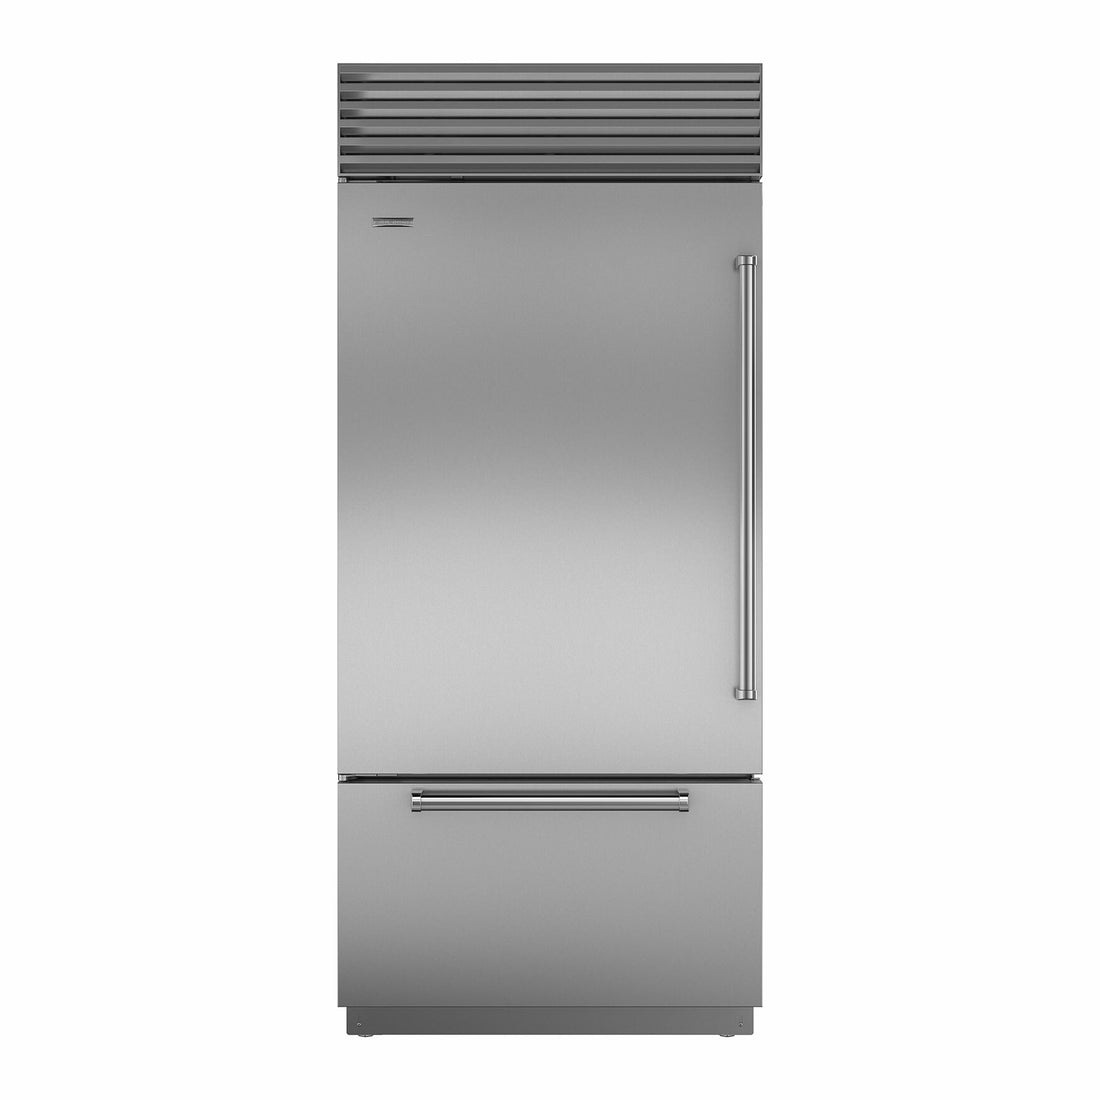 Sub-Zero Built-in Over-and-Under Refrigerator with Freezer Drawer - 2134 x 914mm